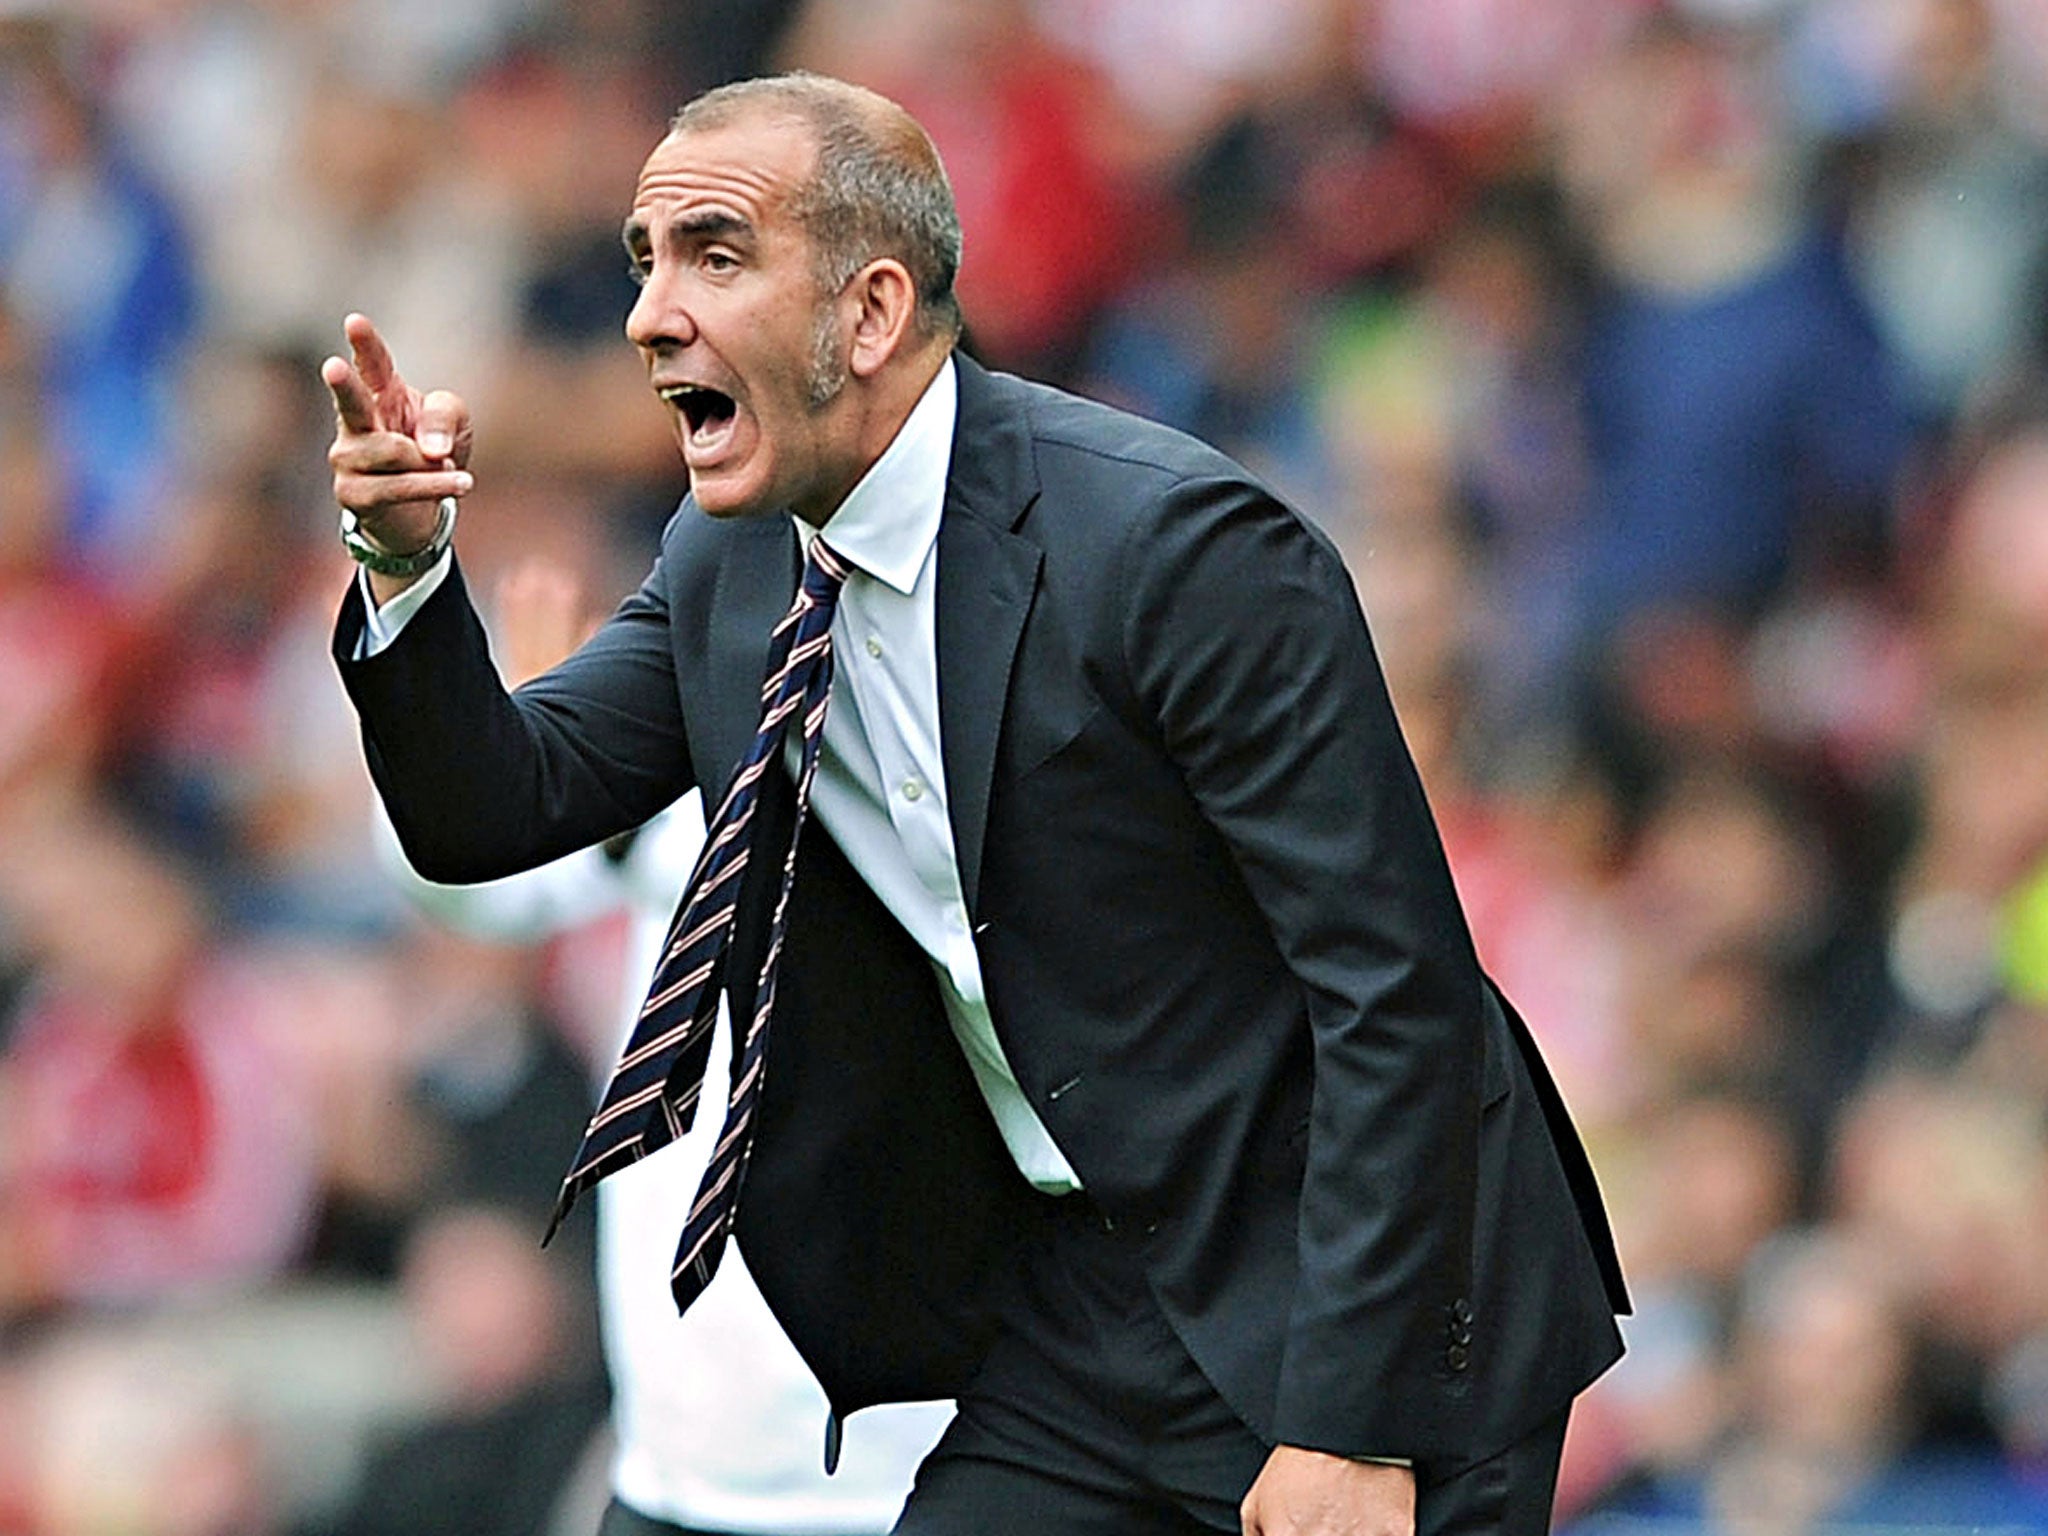 Paolo Di Canio said that if players turned up with mobile phones, he would throw them in the sea